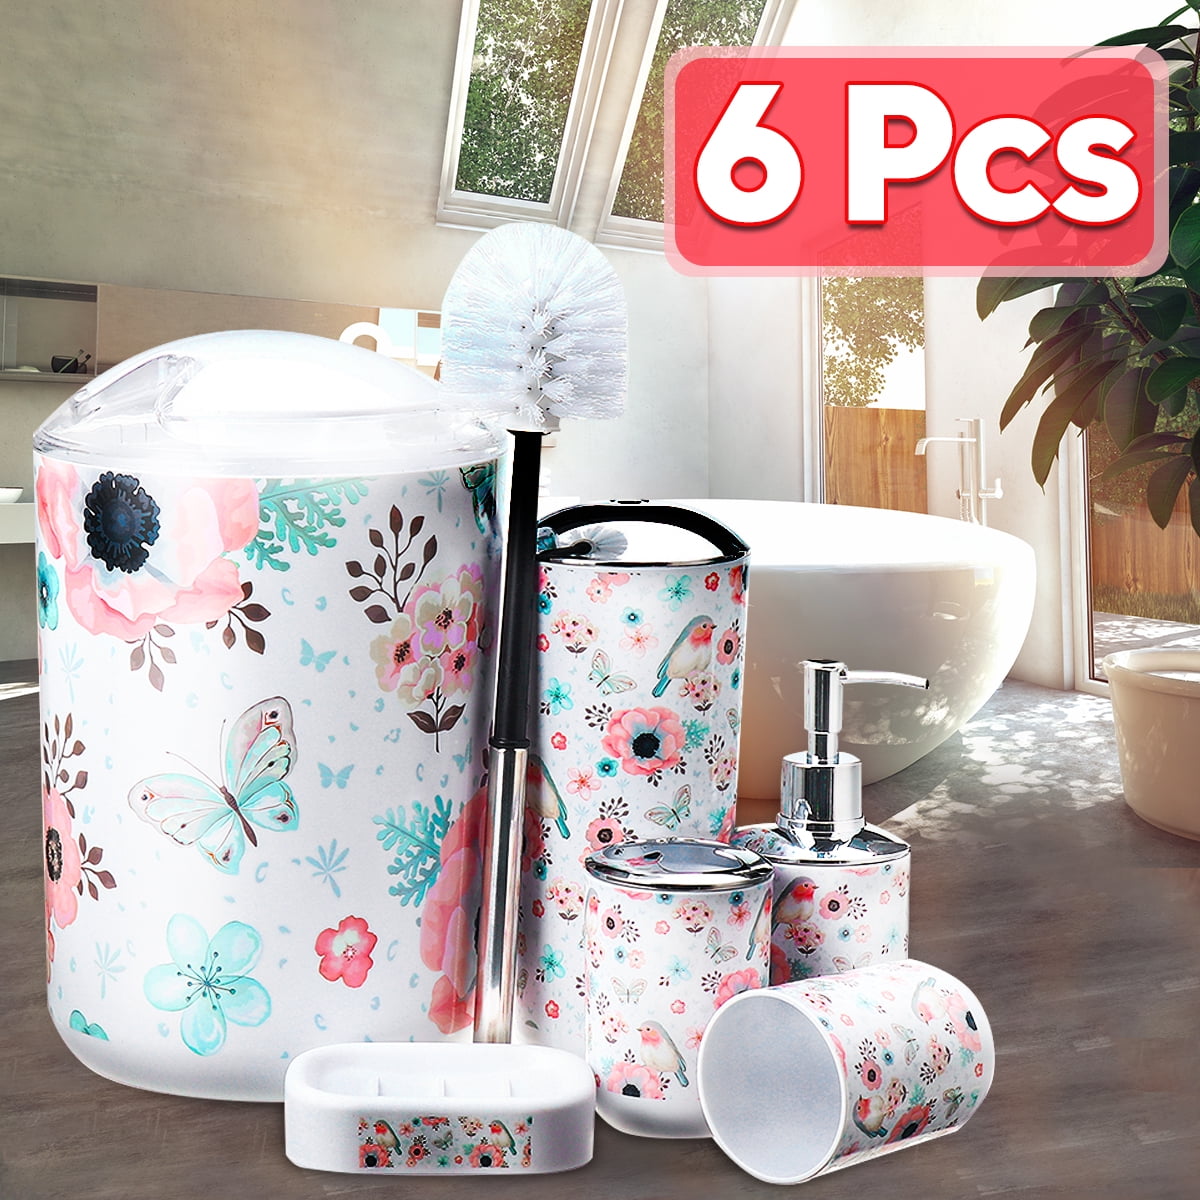 Soap Dish 3328 Style-Beige Toilet Brush Trash Can Housewarming Gift Set Toothbrush Holder Soap Dispenser 6 Pcs Bathroom Accessories Set Toothbrush Cup